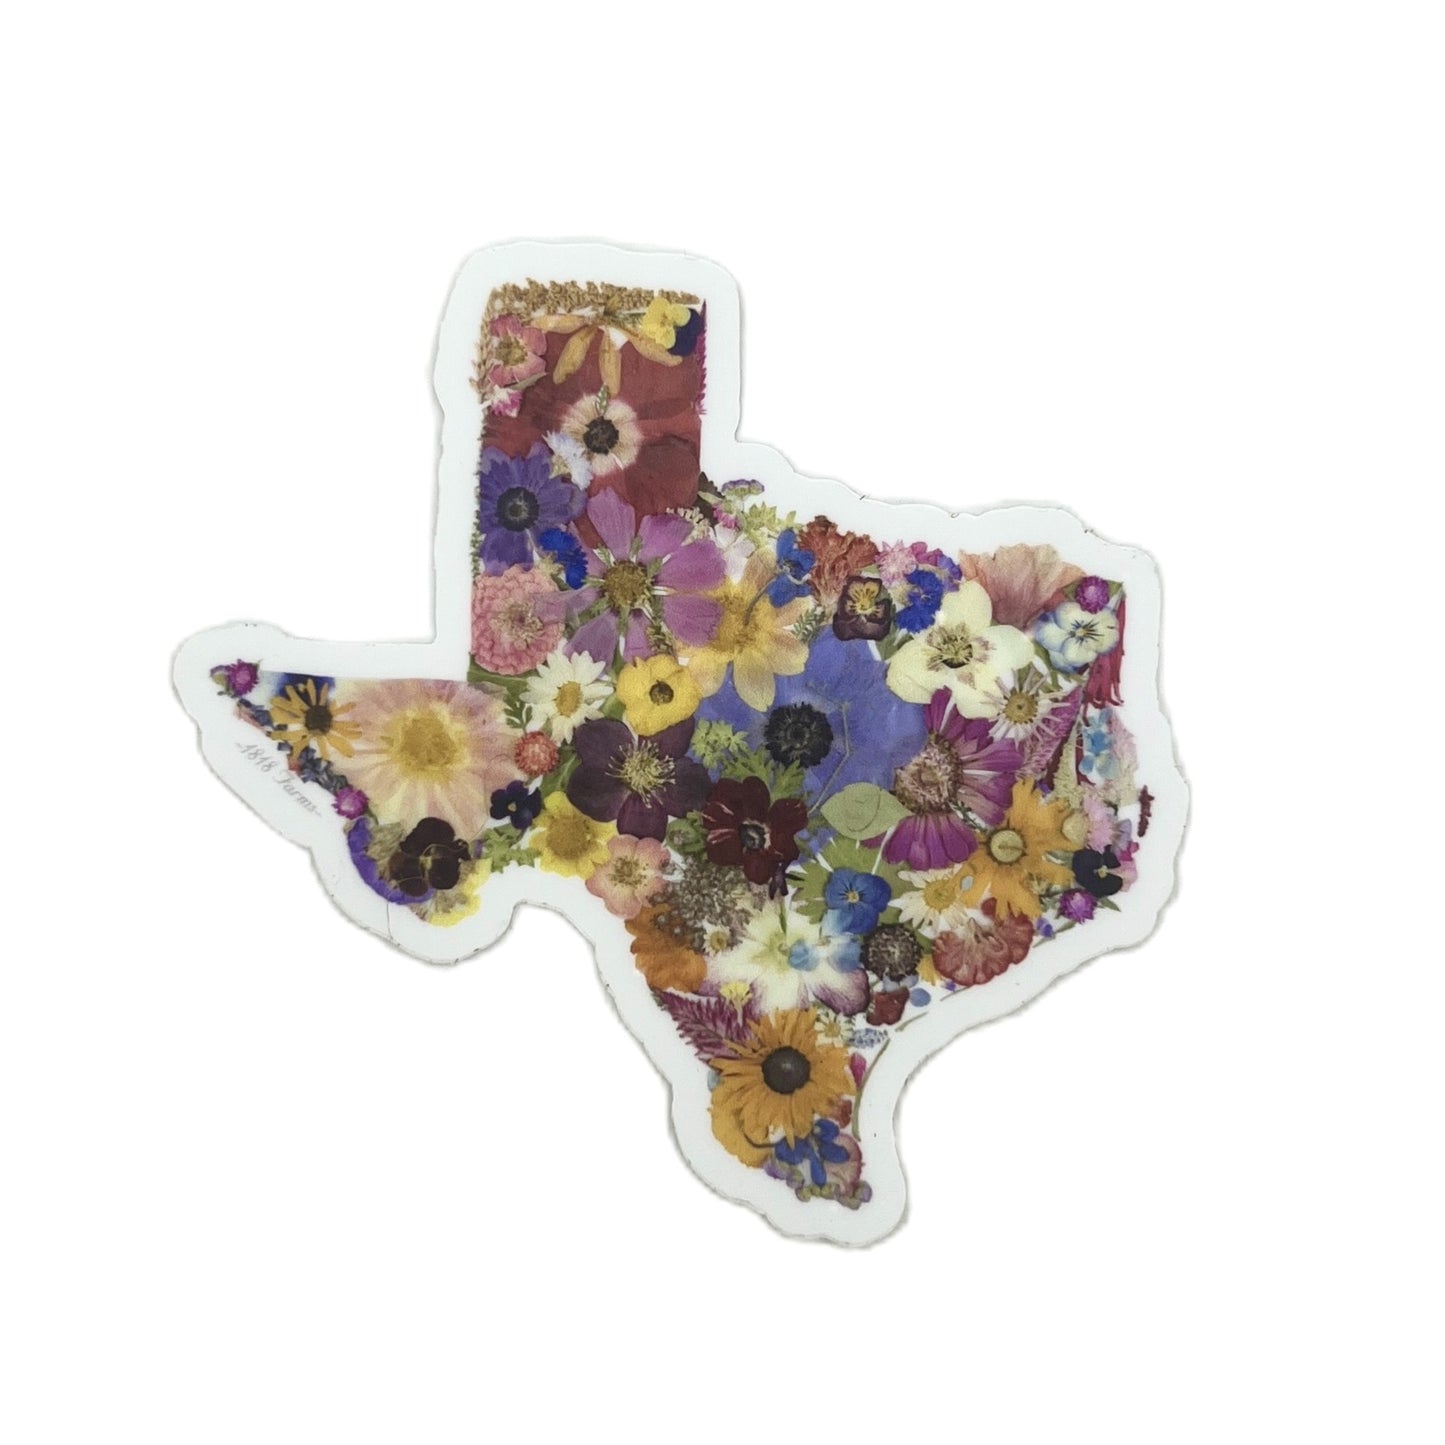 State Themed Vinyl Sticker  - "Where I Bloom" Collection Vinyl Sticker 1818 Farms Texas  